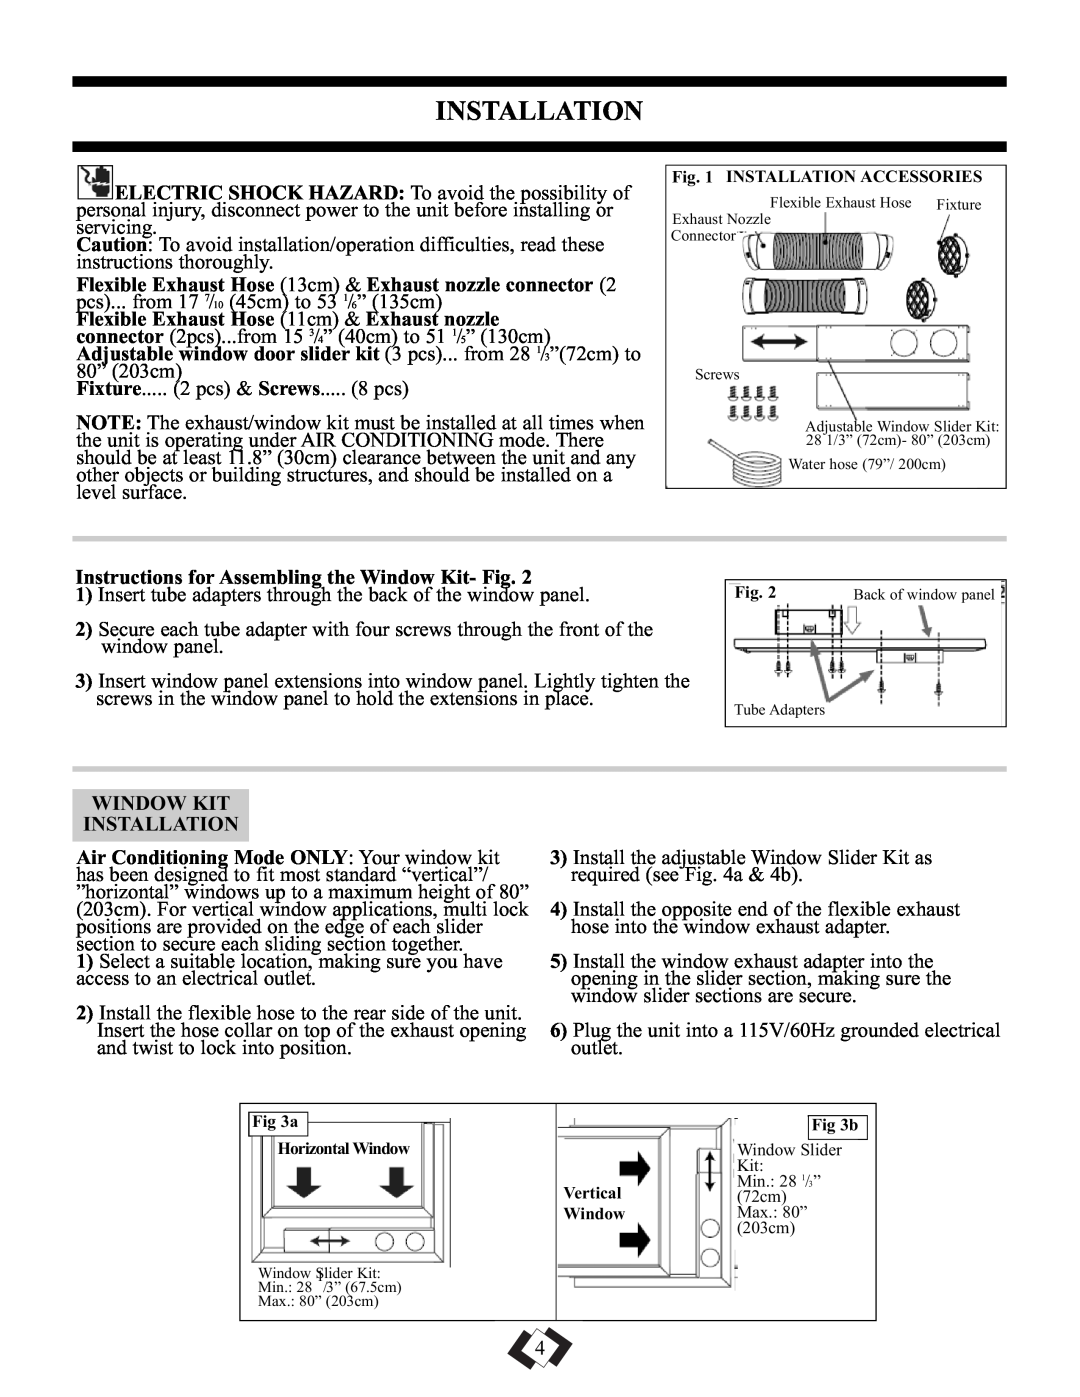 Danby DPAC5009 manual Instructions for Assembling the Window Kit- Fig, Window Kit Installation 